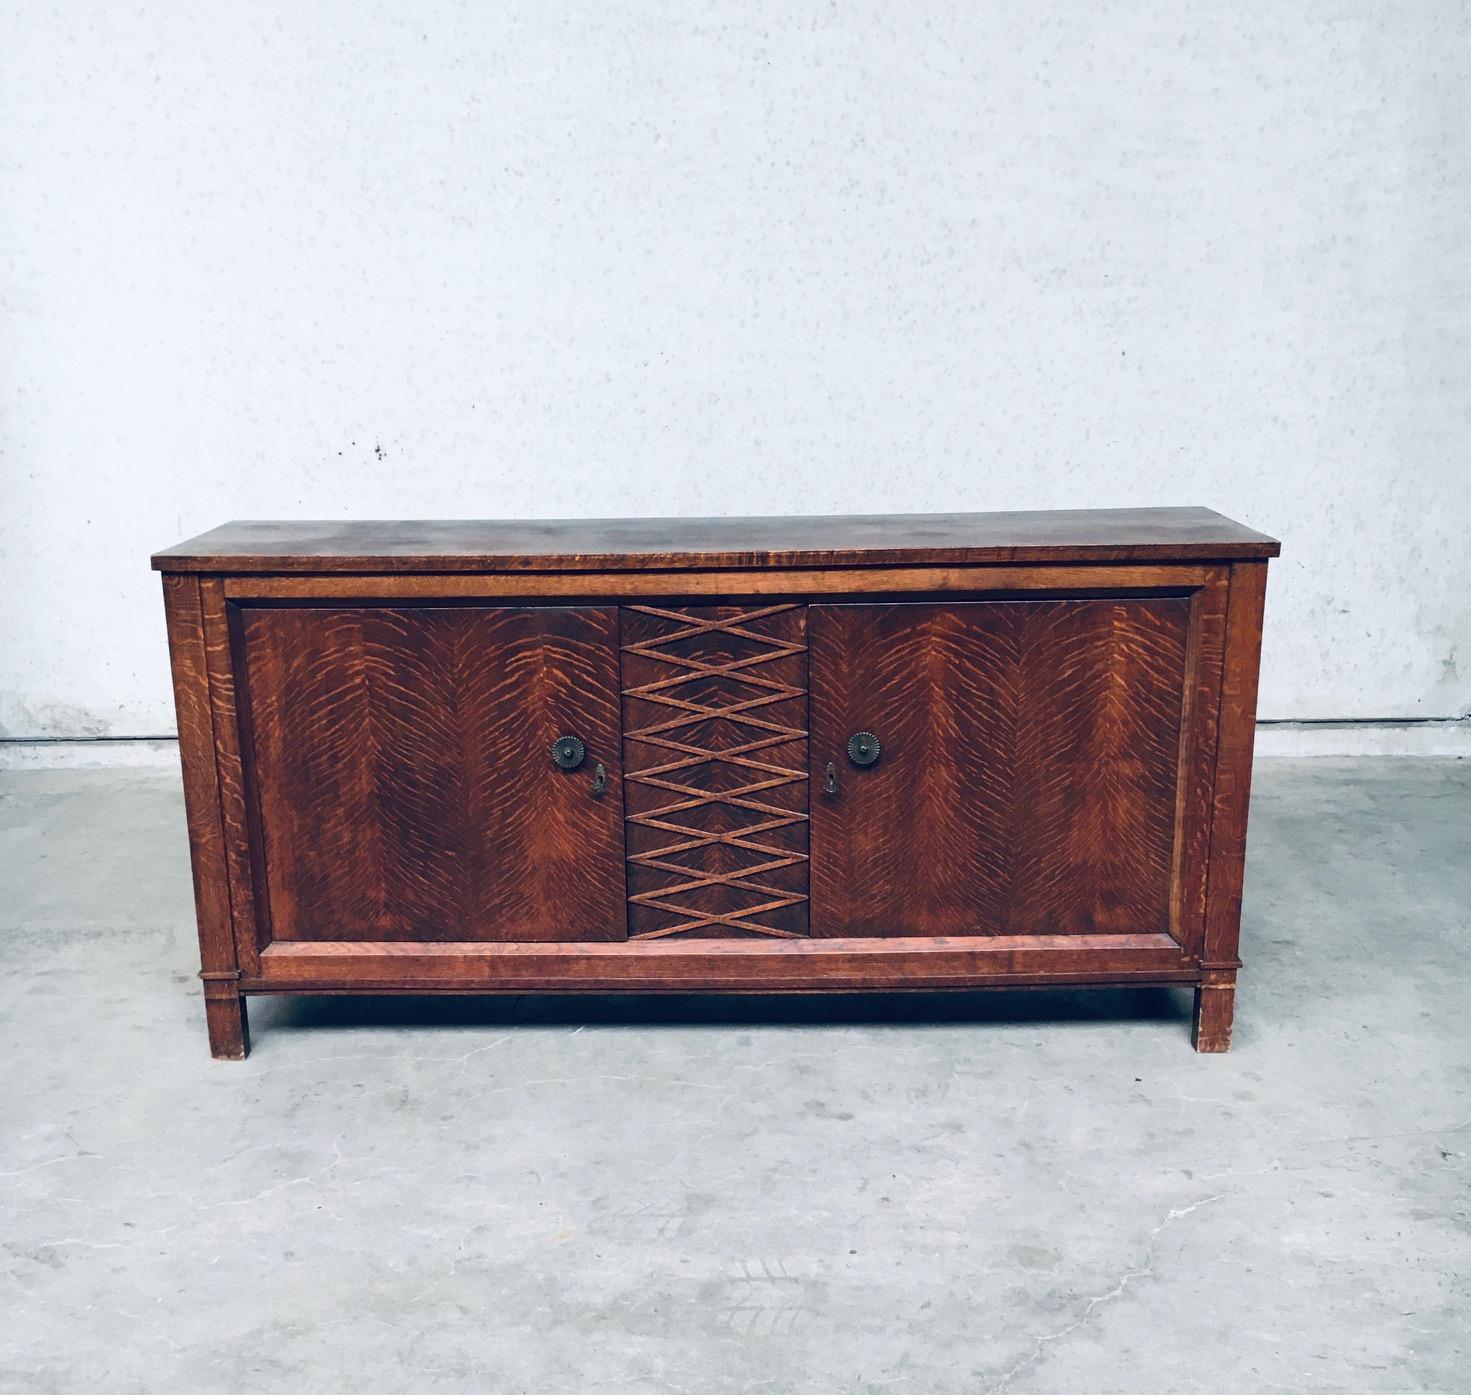 Vintage Arts & Crafts Mission Style Design Craftsman sideboard credenza Buffet Chest, made in France early 1900s - 1920s. Oak wood constructed buffet with blonde oak wood drawers inside. The front has a patterned striped motif set on the wood panels